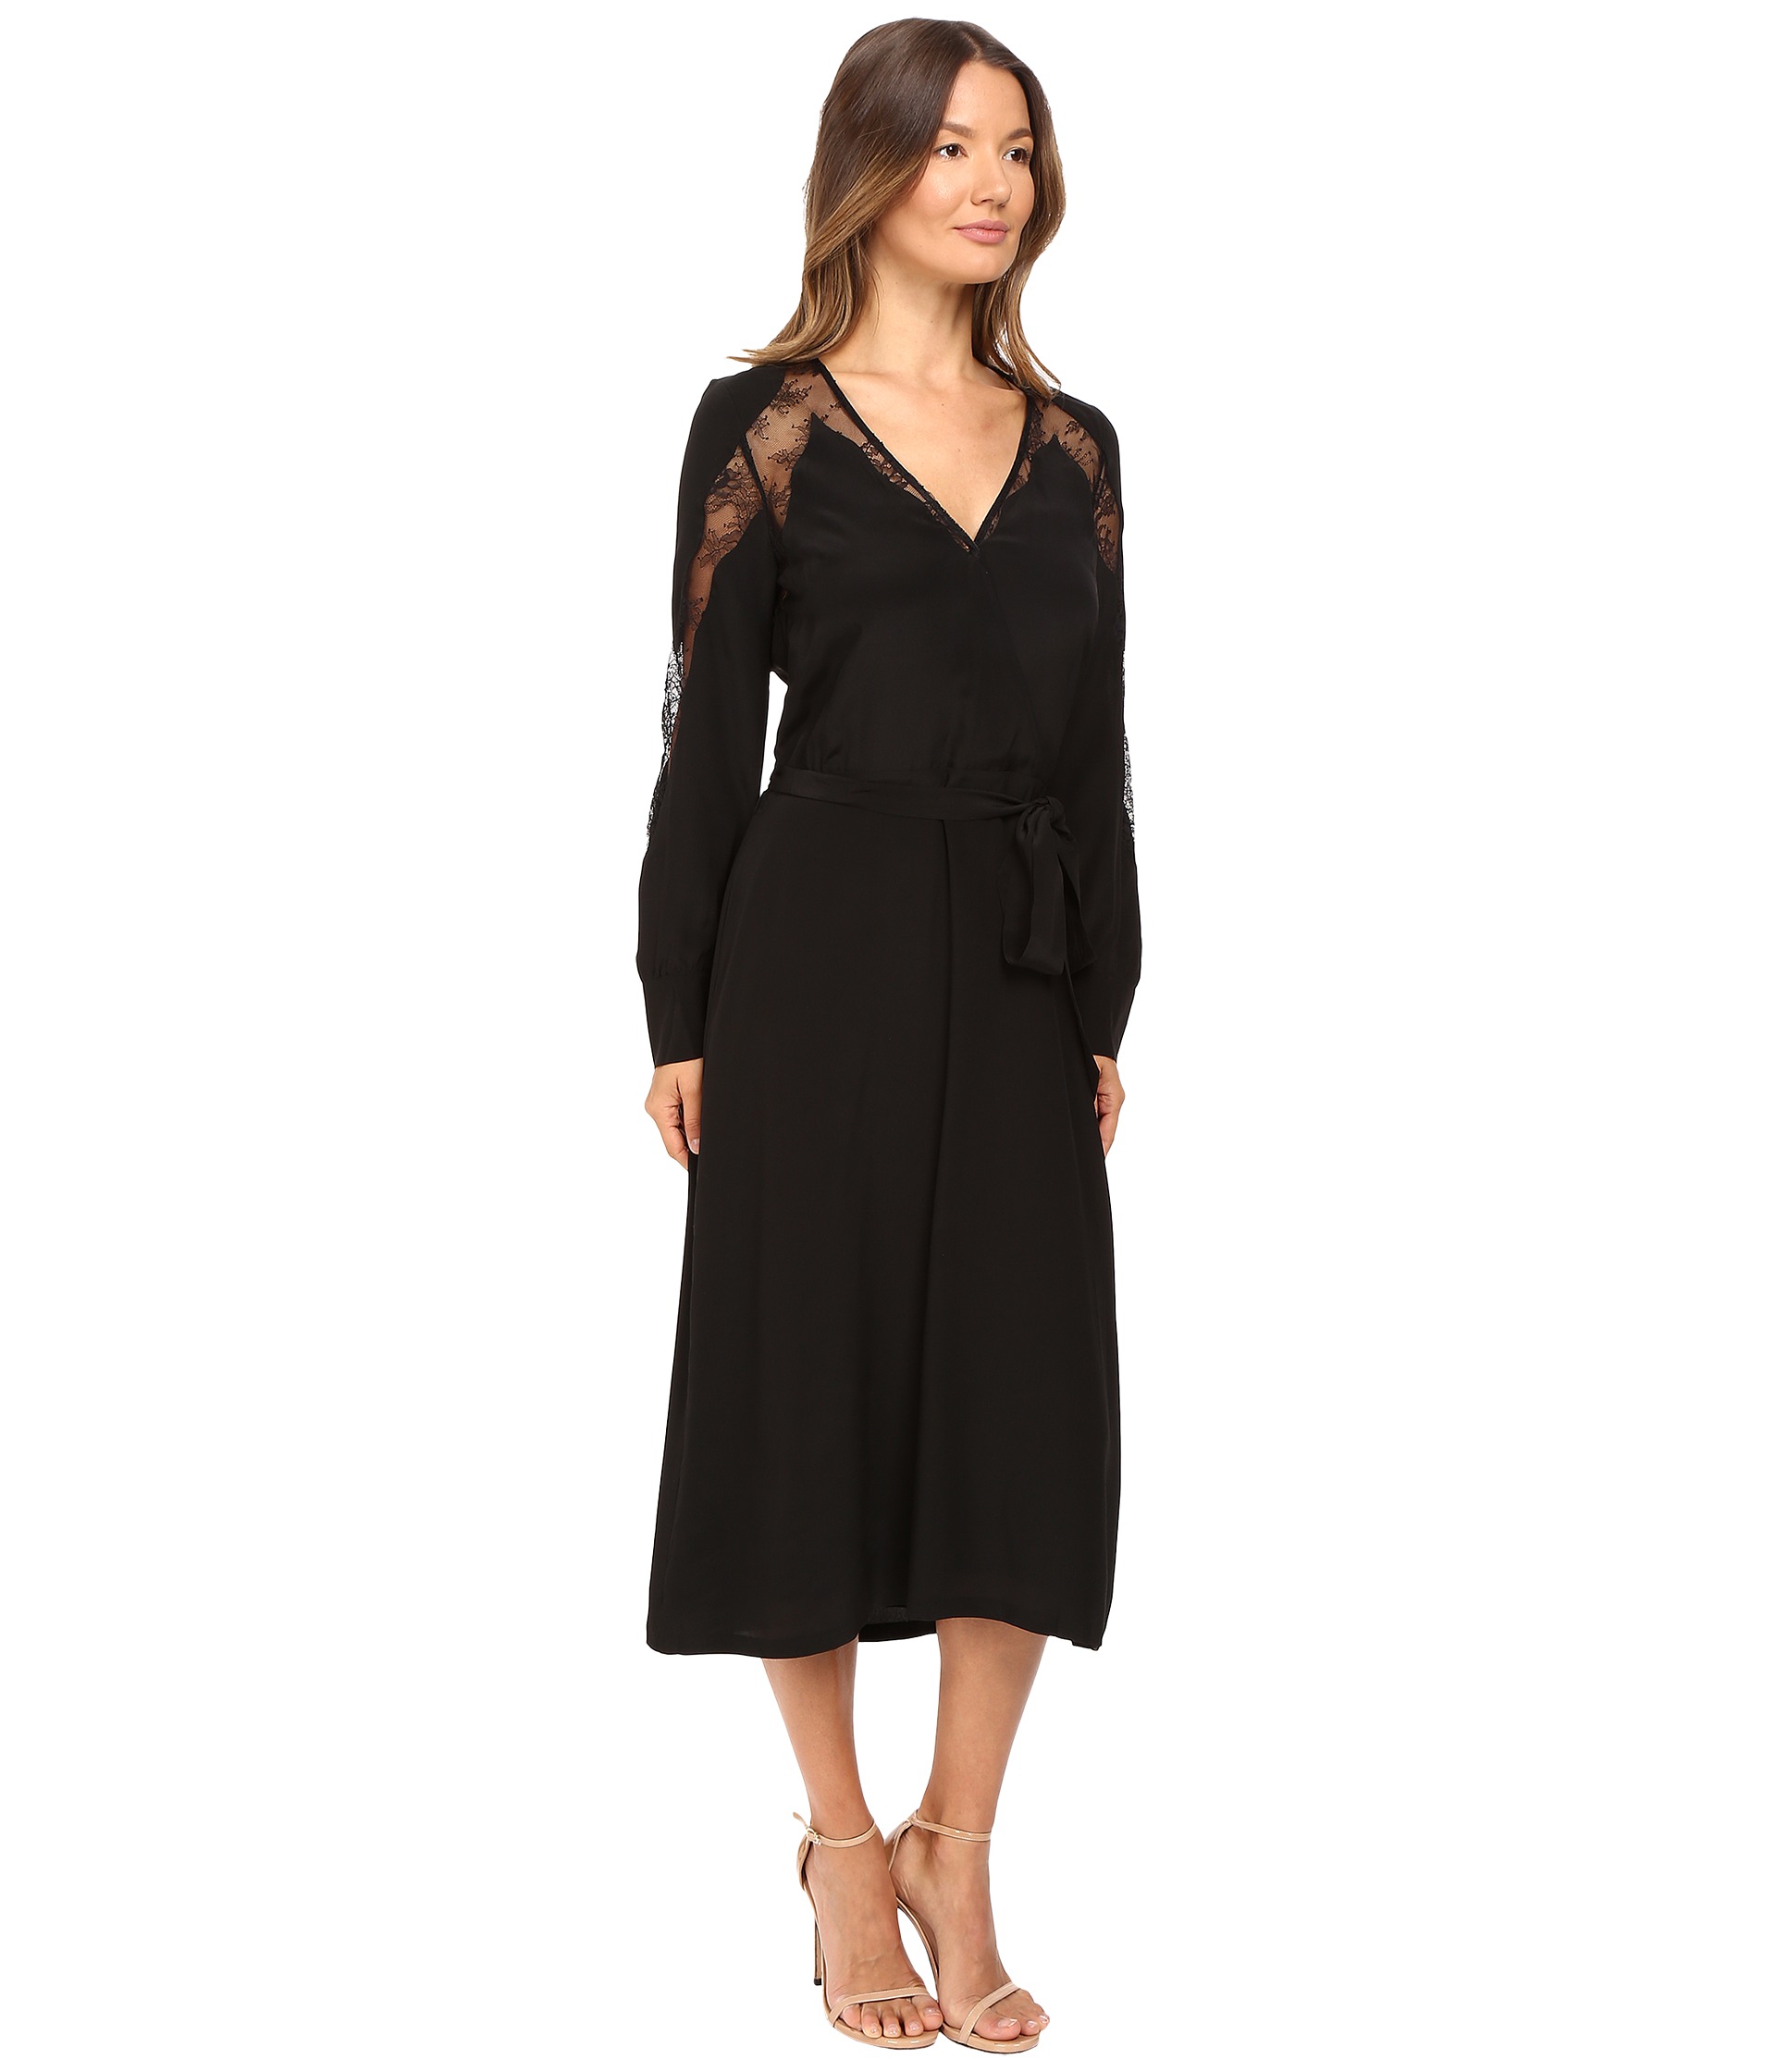 The Kooples Silk Dress with Lace Overlay Black - Zappos.com Free ...